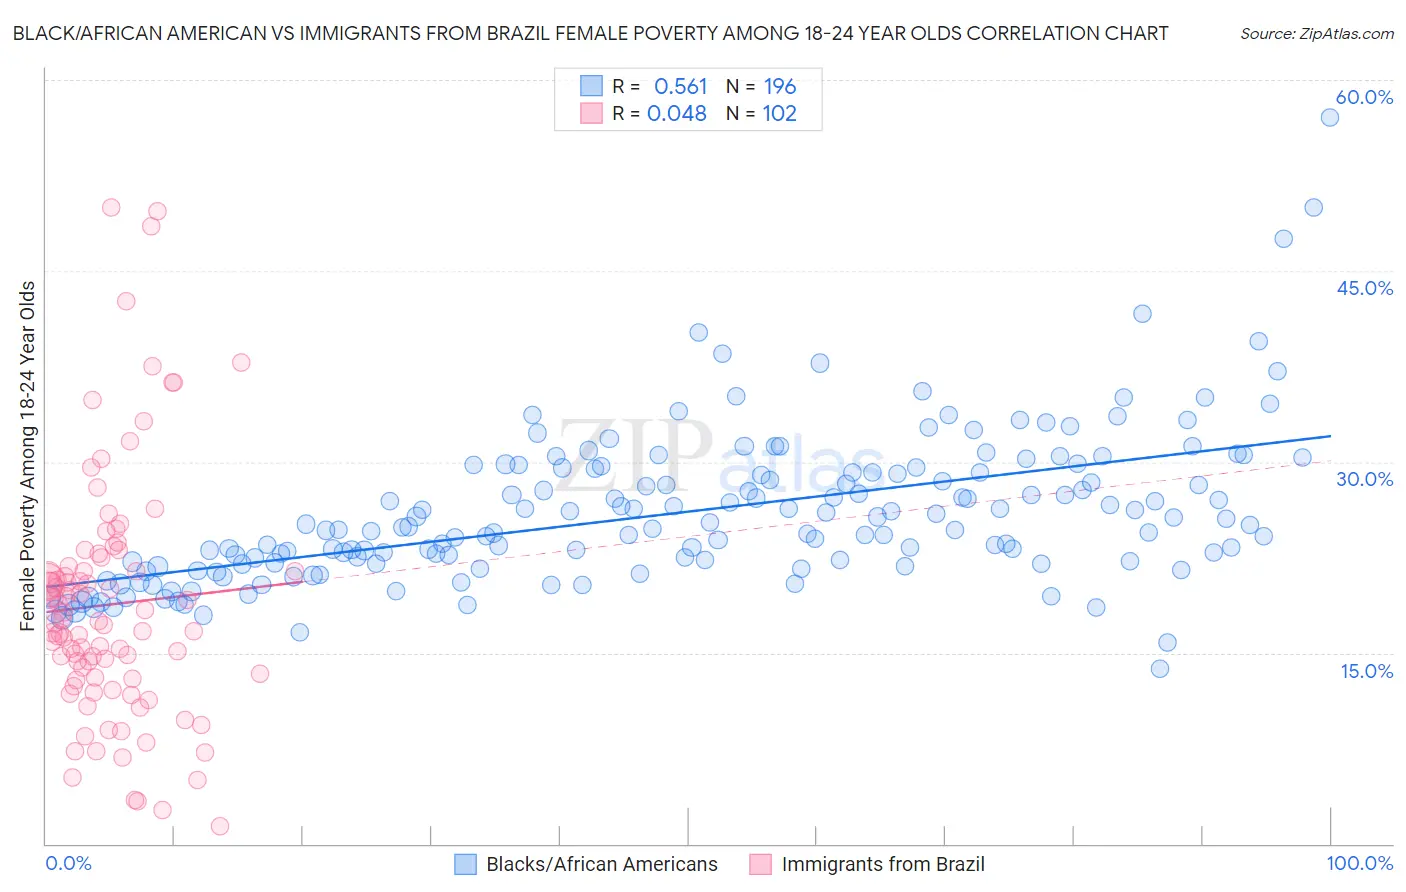 Black/African American vs Immigrants from Brazil Female Poverty Among 18-24 Year Olds